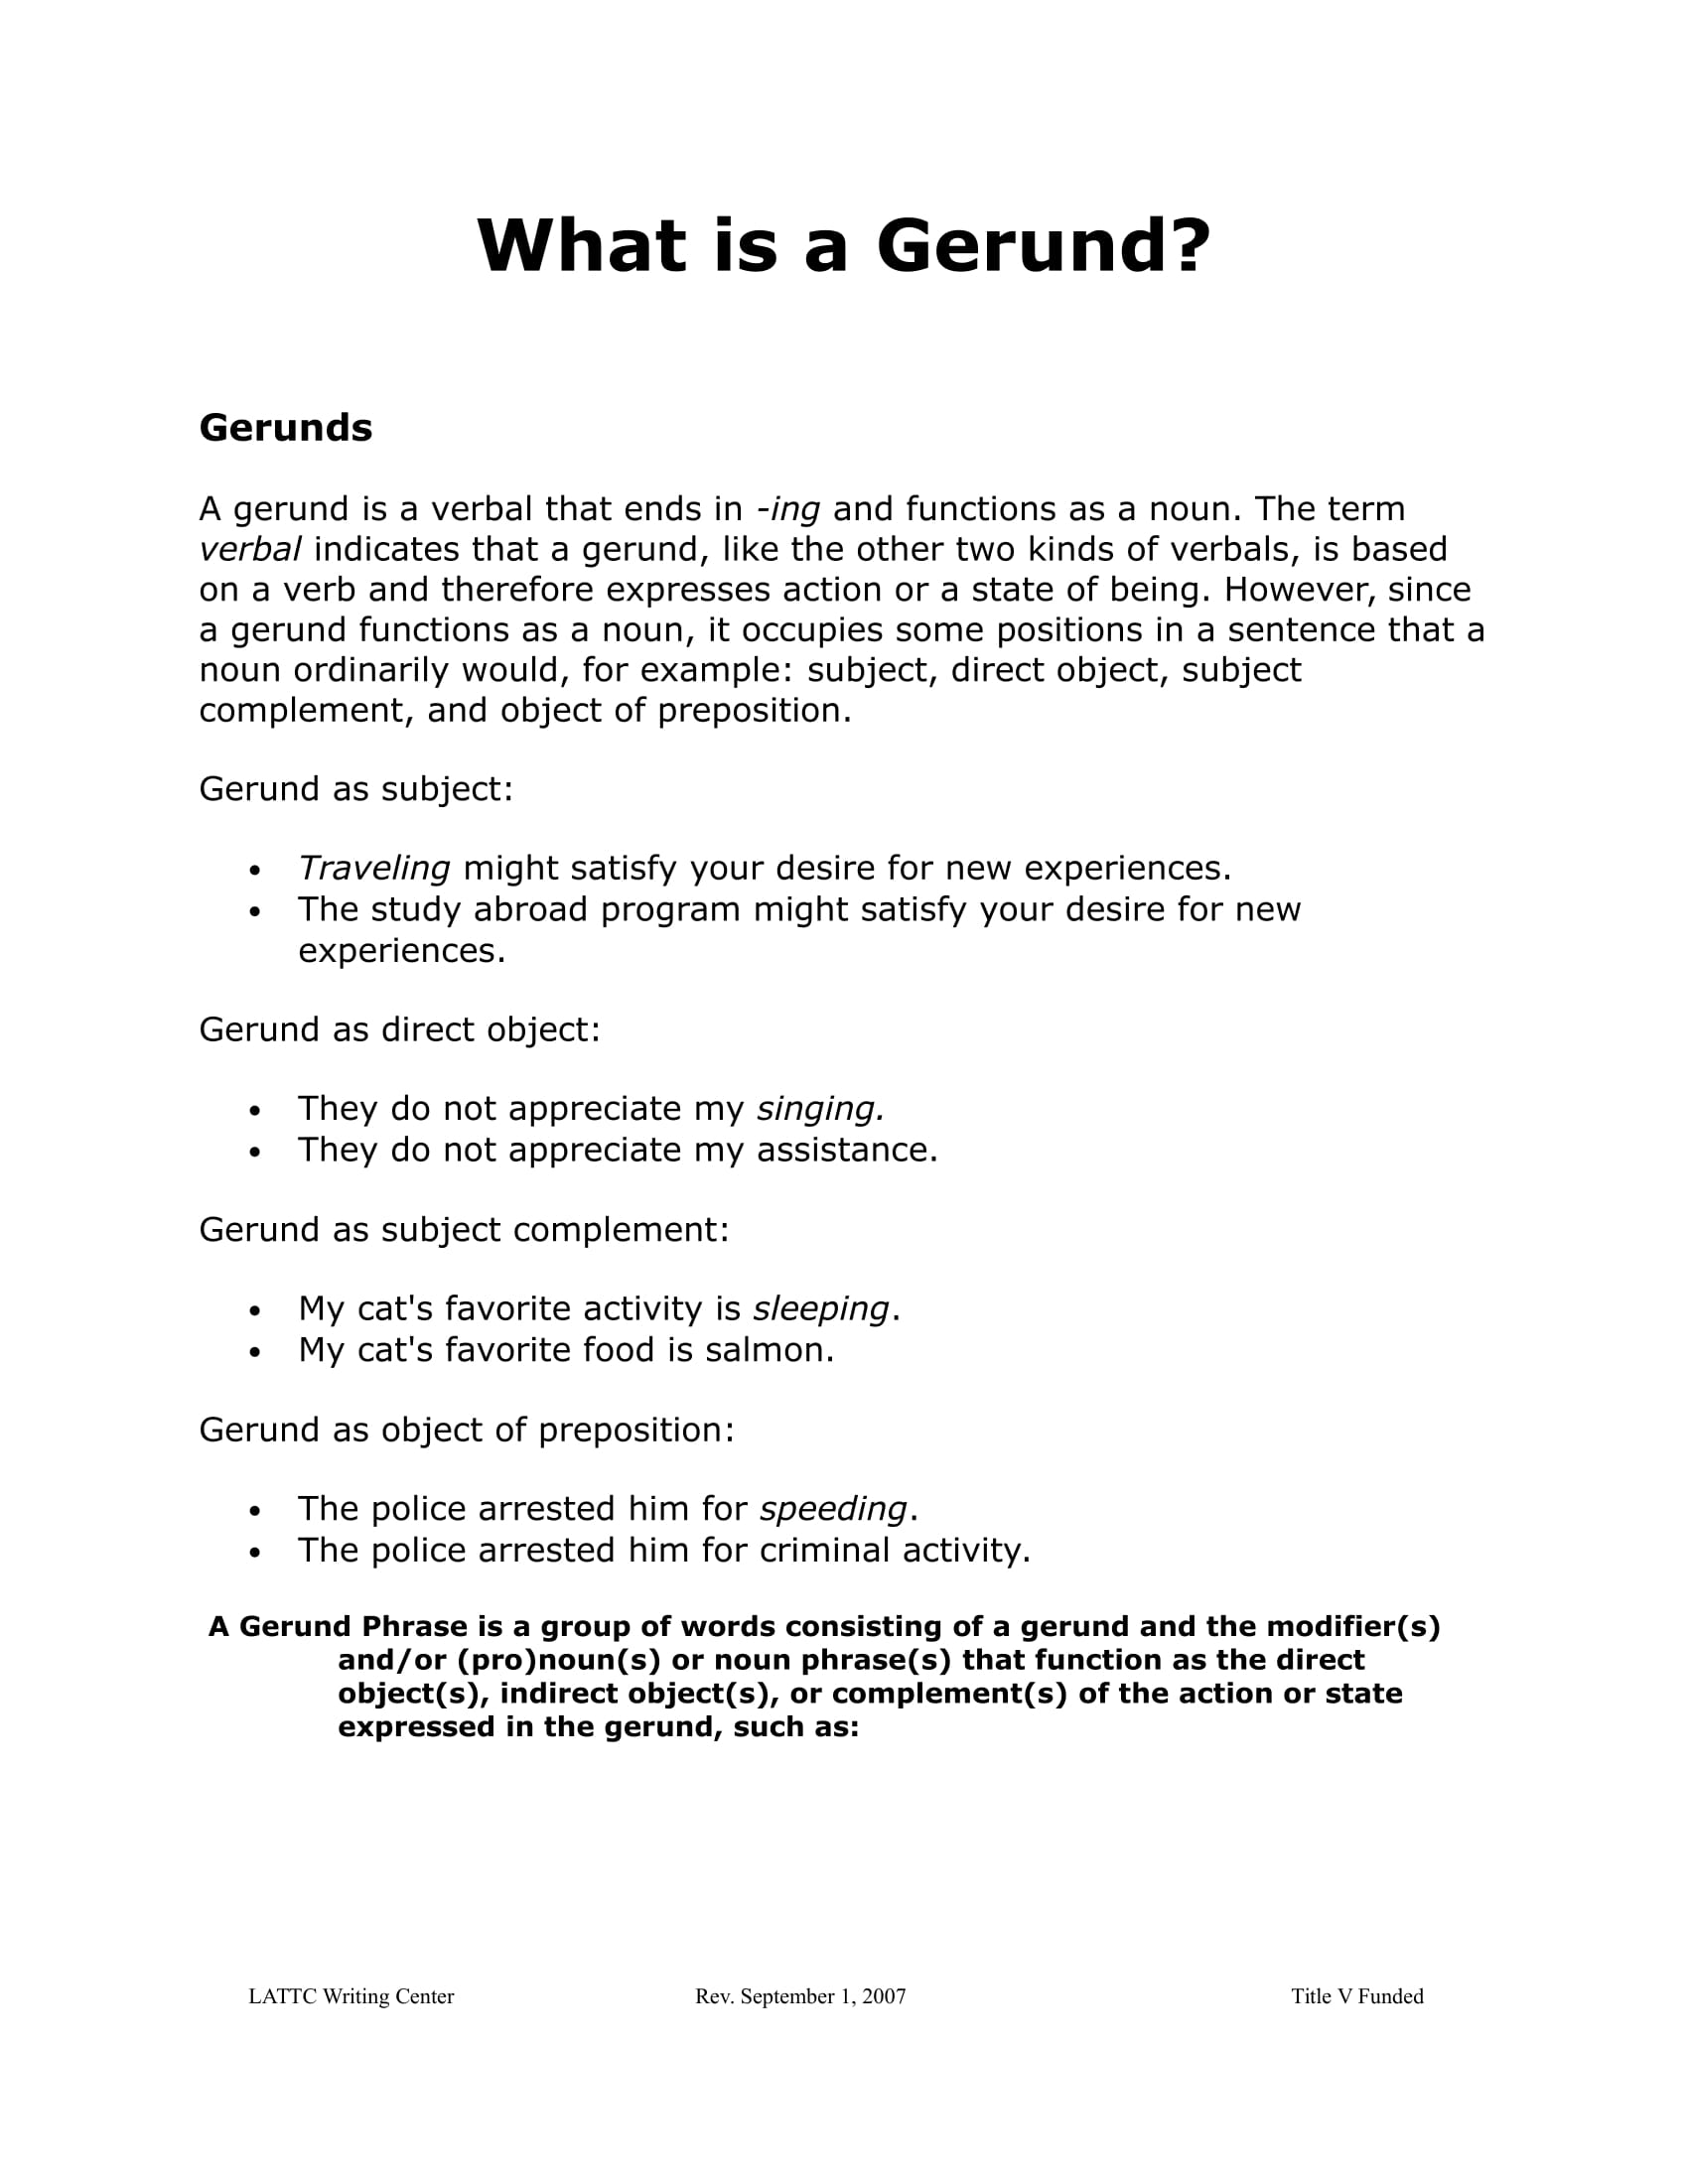 an example of a gerund